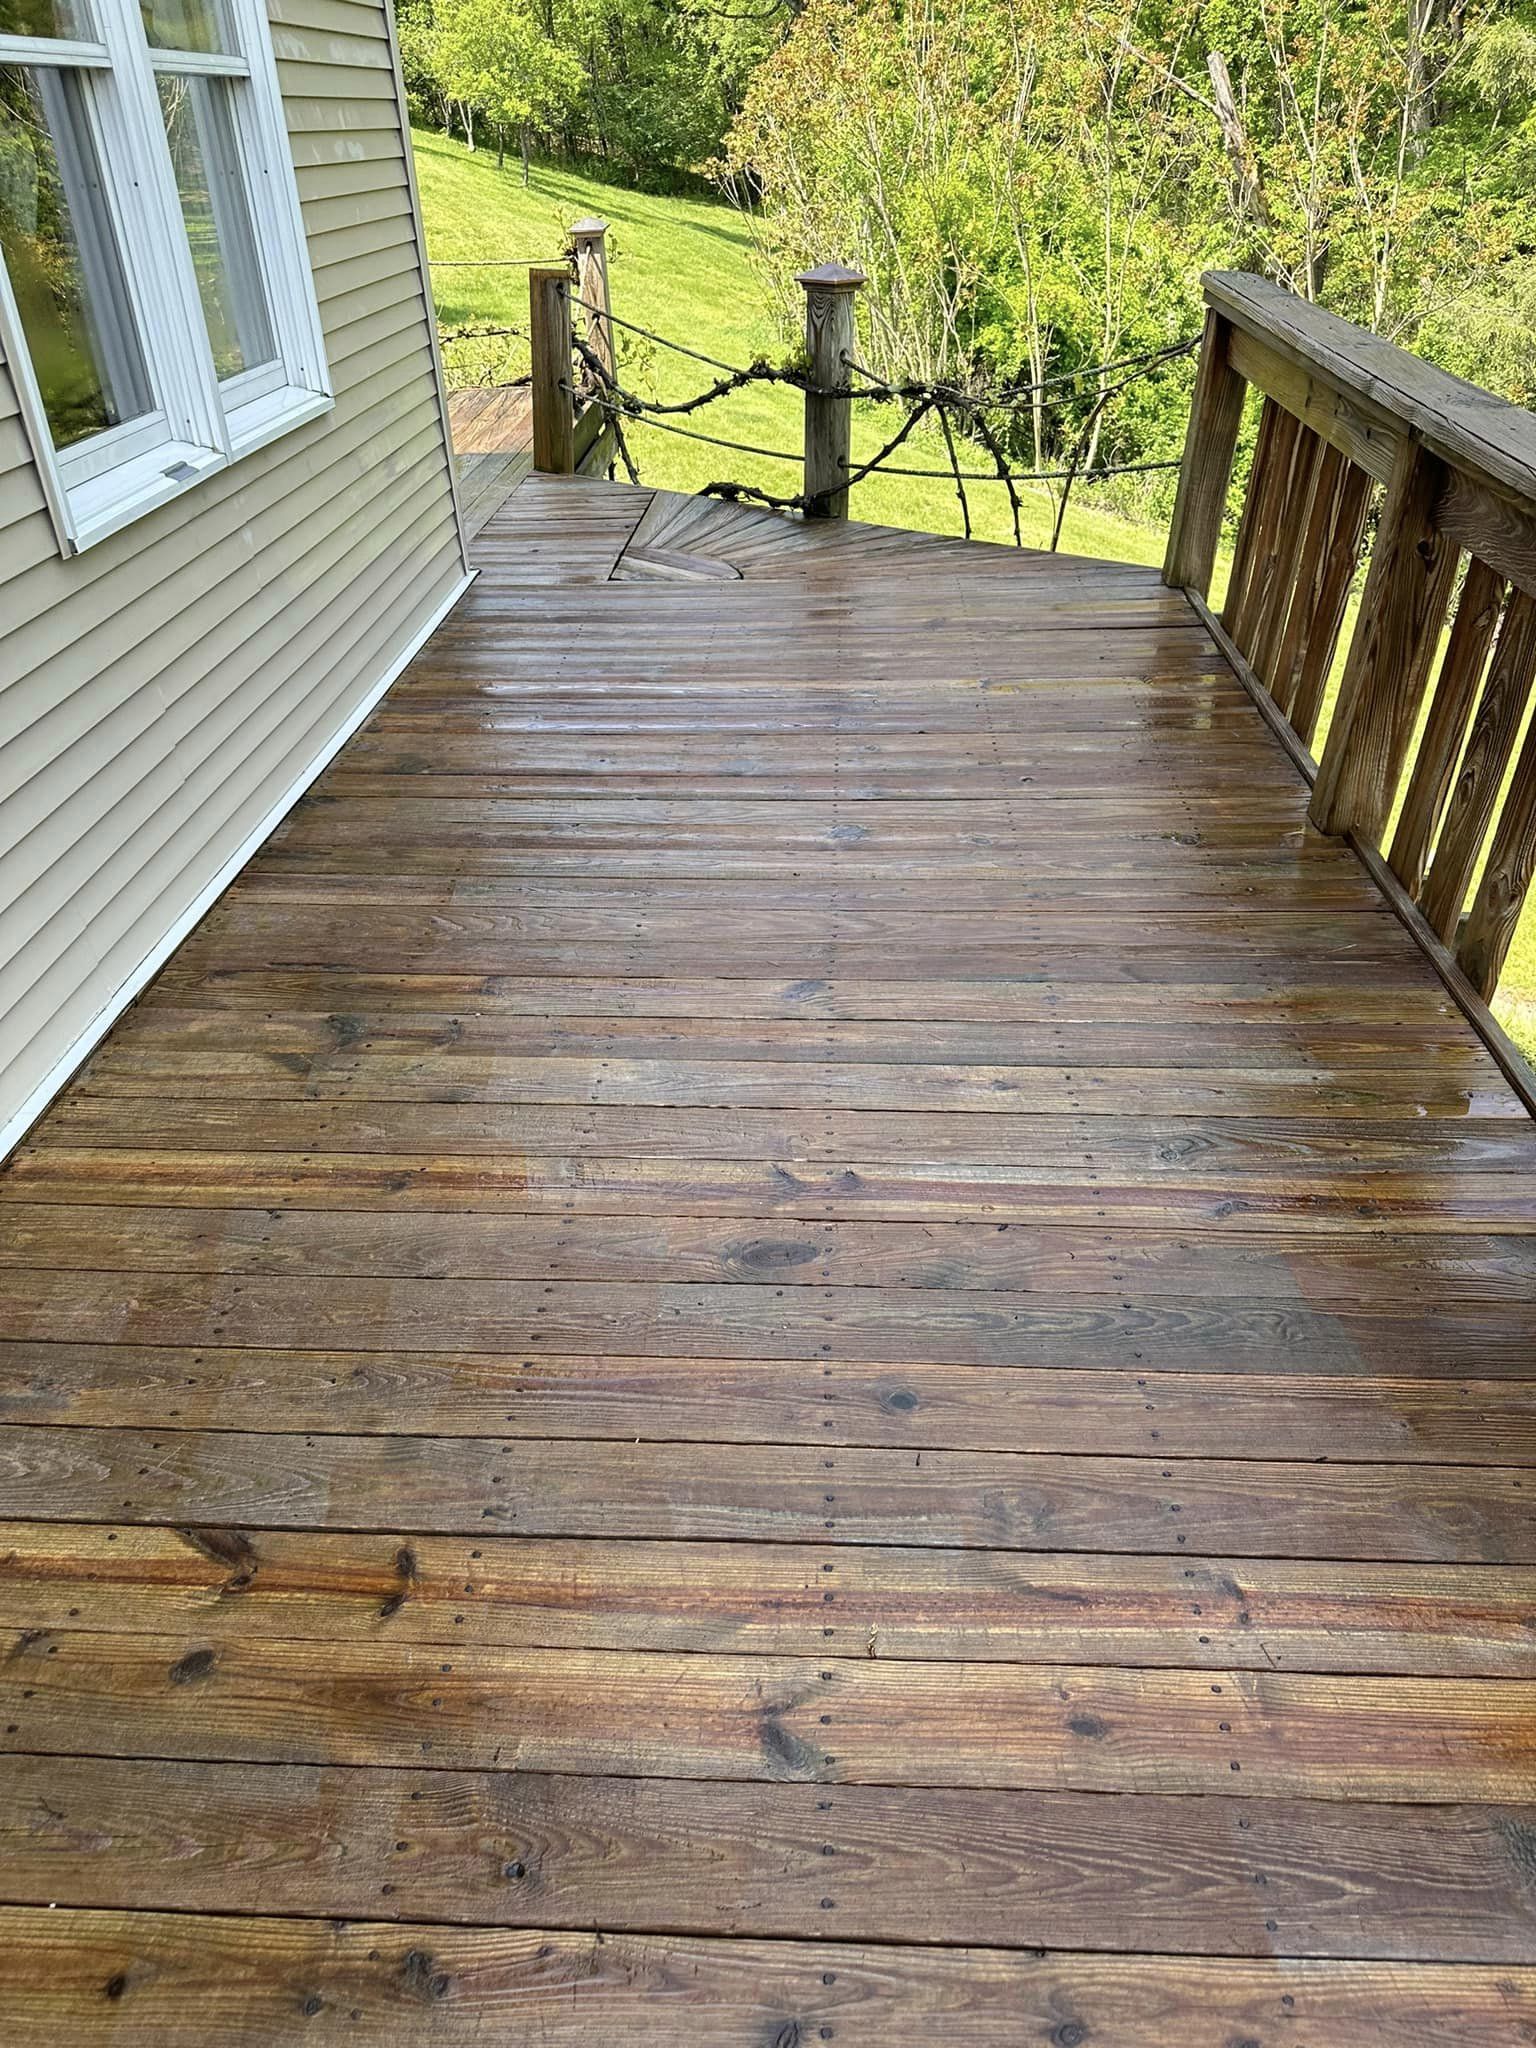 Expert pressure washing services for fence and deck cleaning in Elysburg PA by NextGen Power Wash LLC